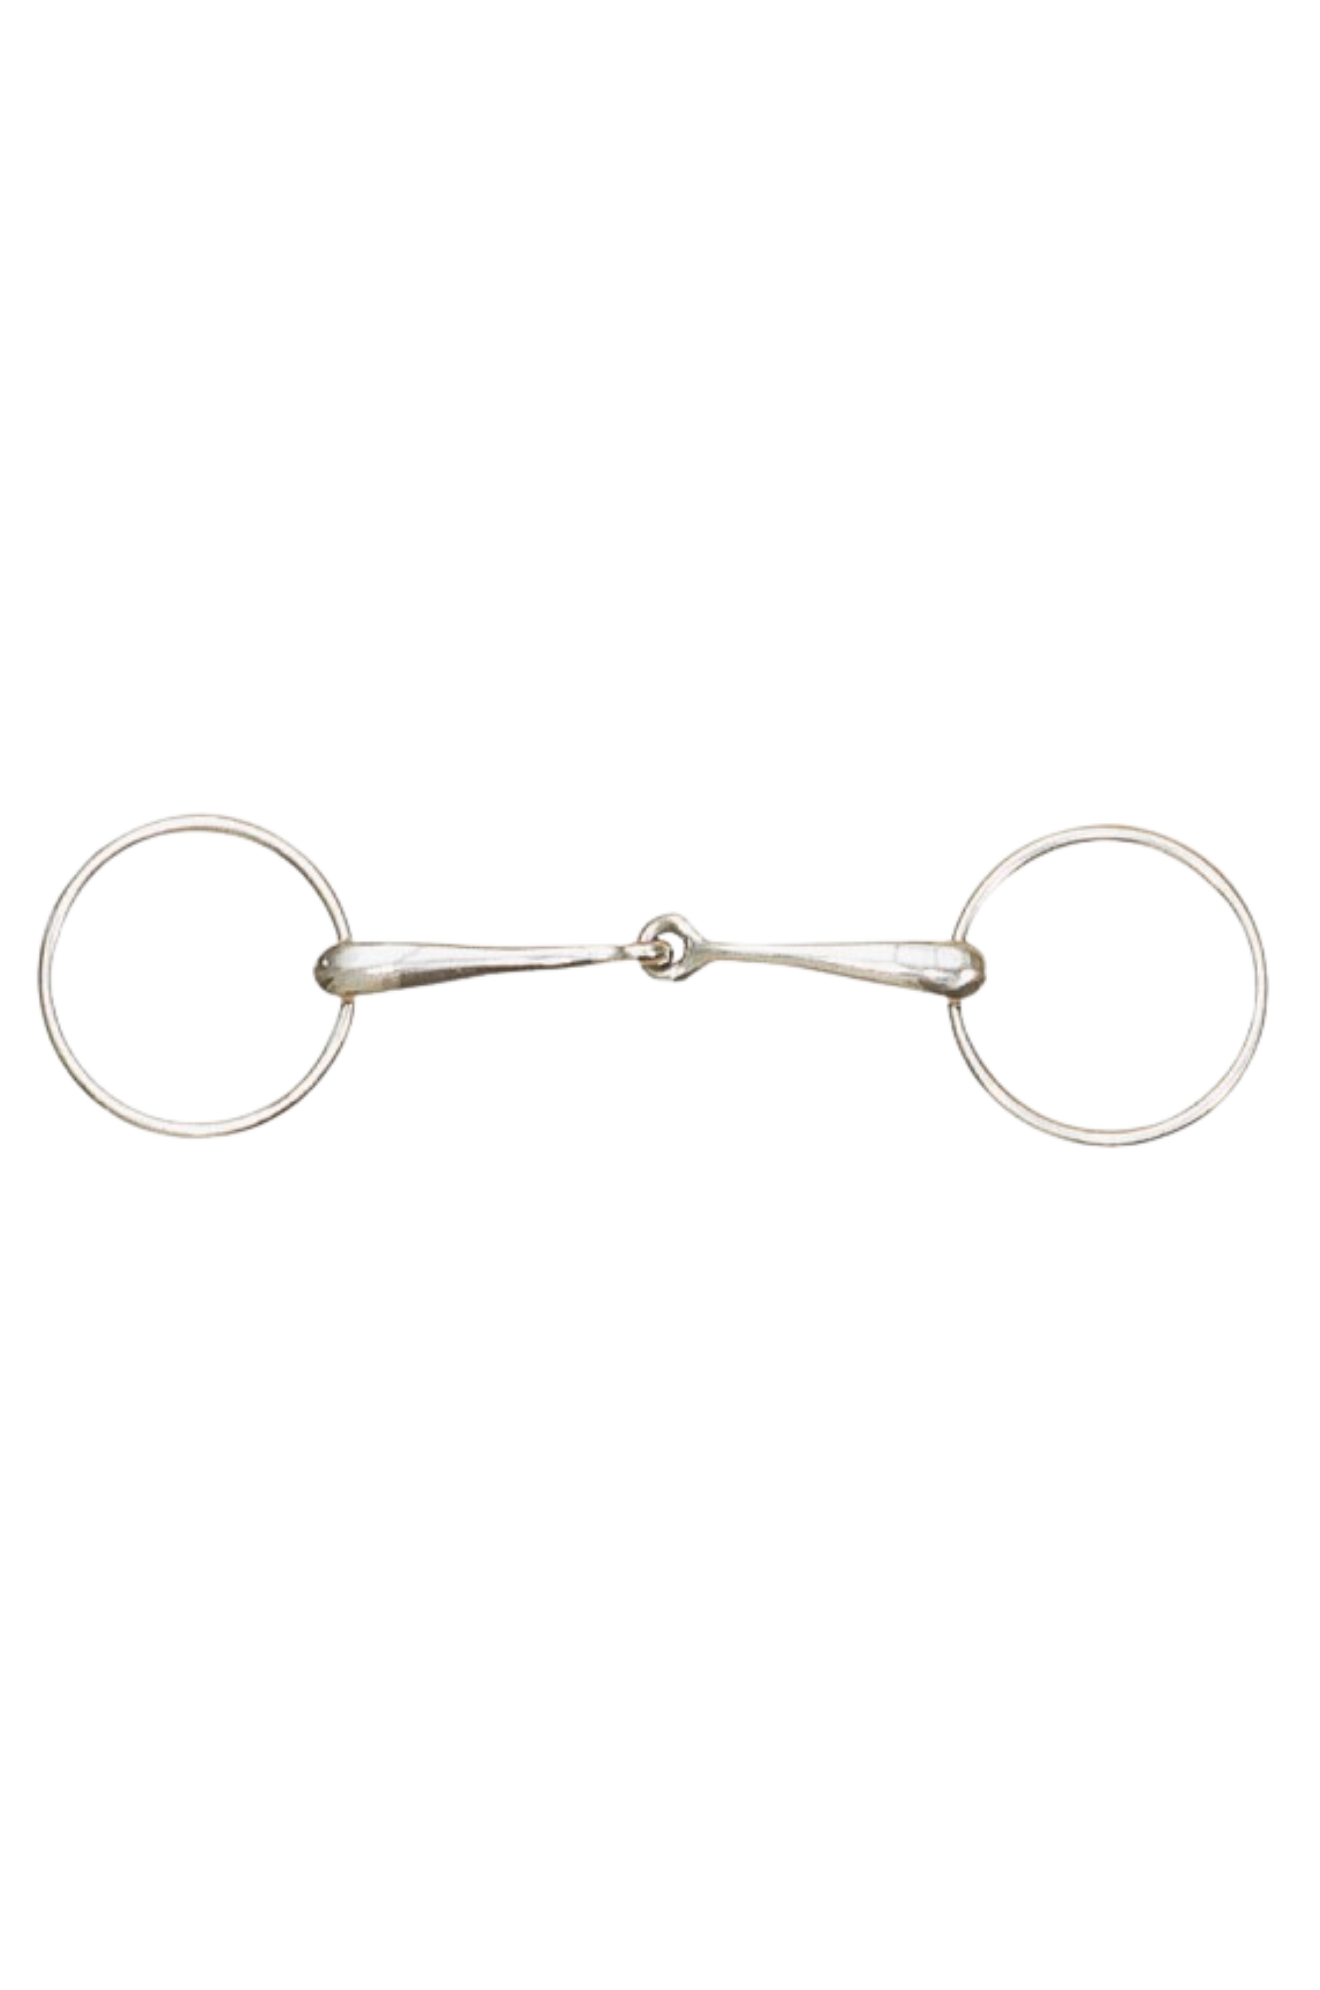 CENTAUR JOINT HOLLOW MOUTH LOOSE RING